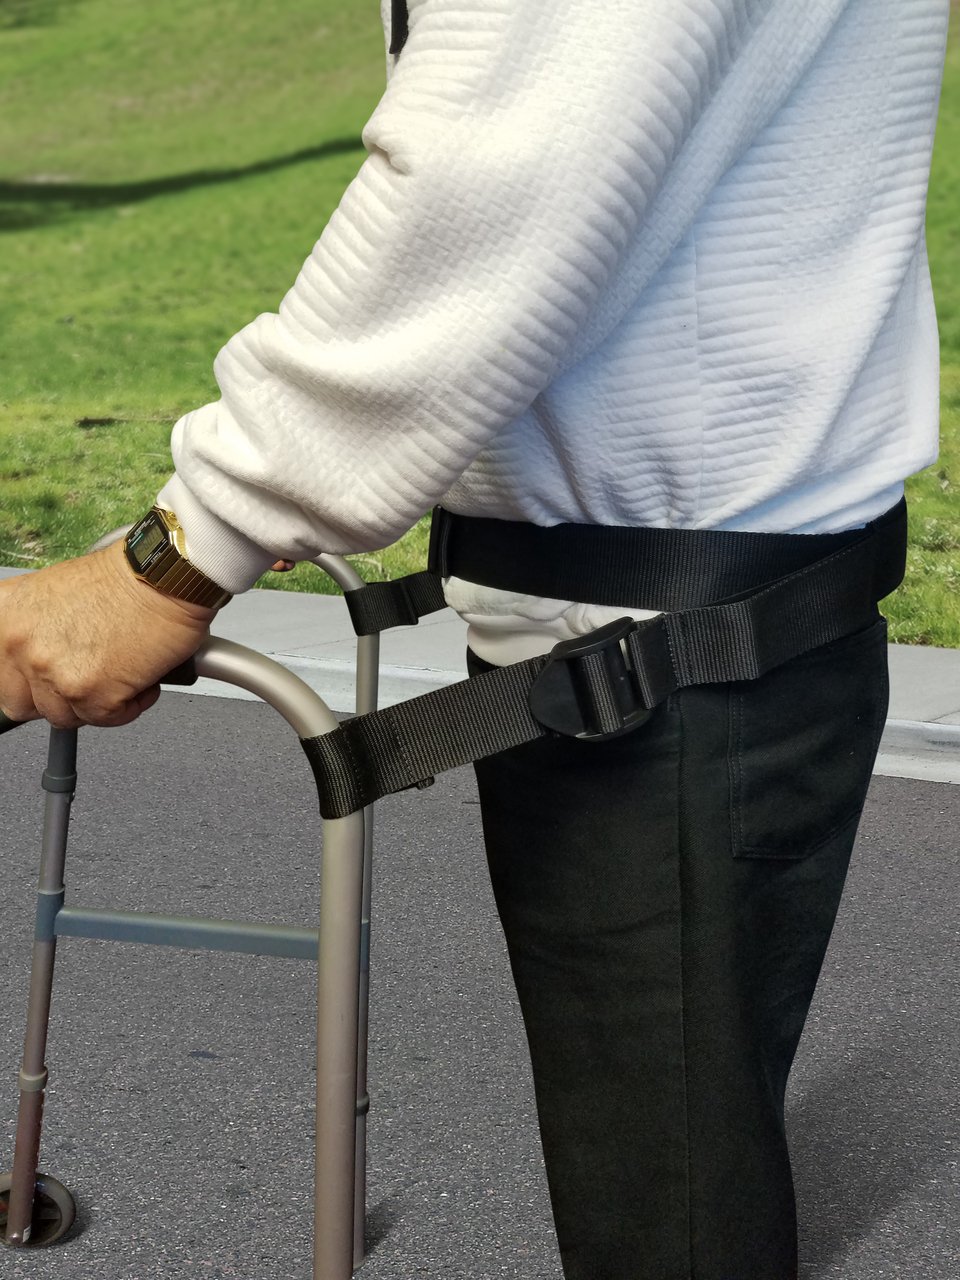 Posture Correcting Walker Gait Belt - Attach to Any Walker for Posture Support & Increased Mobility - Mars Med Supply